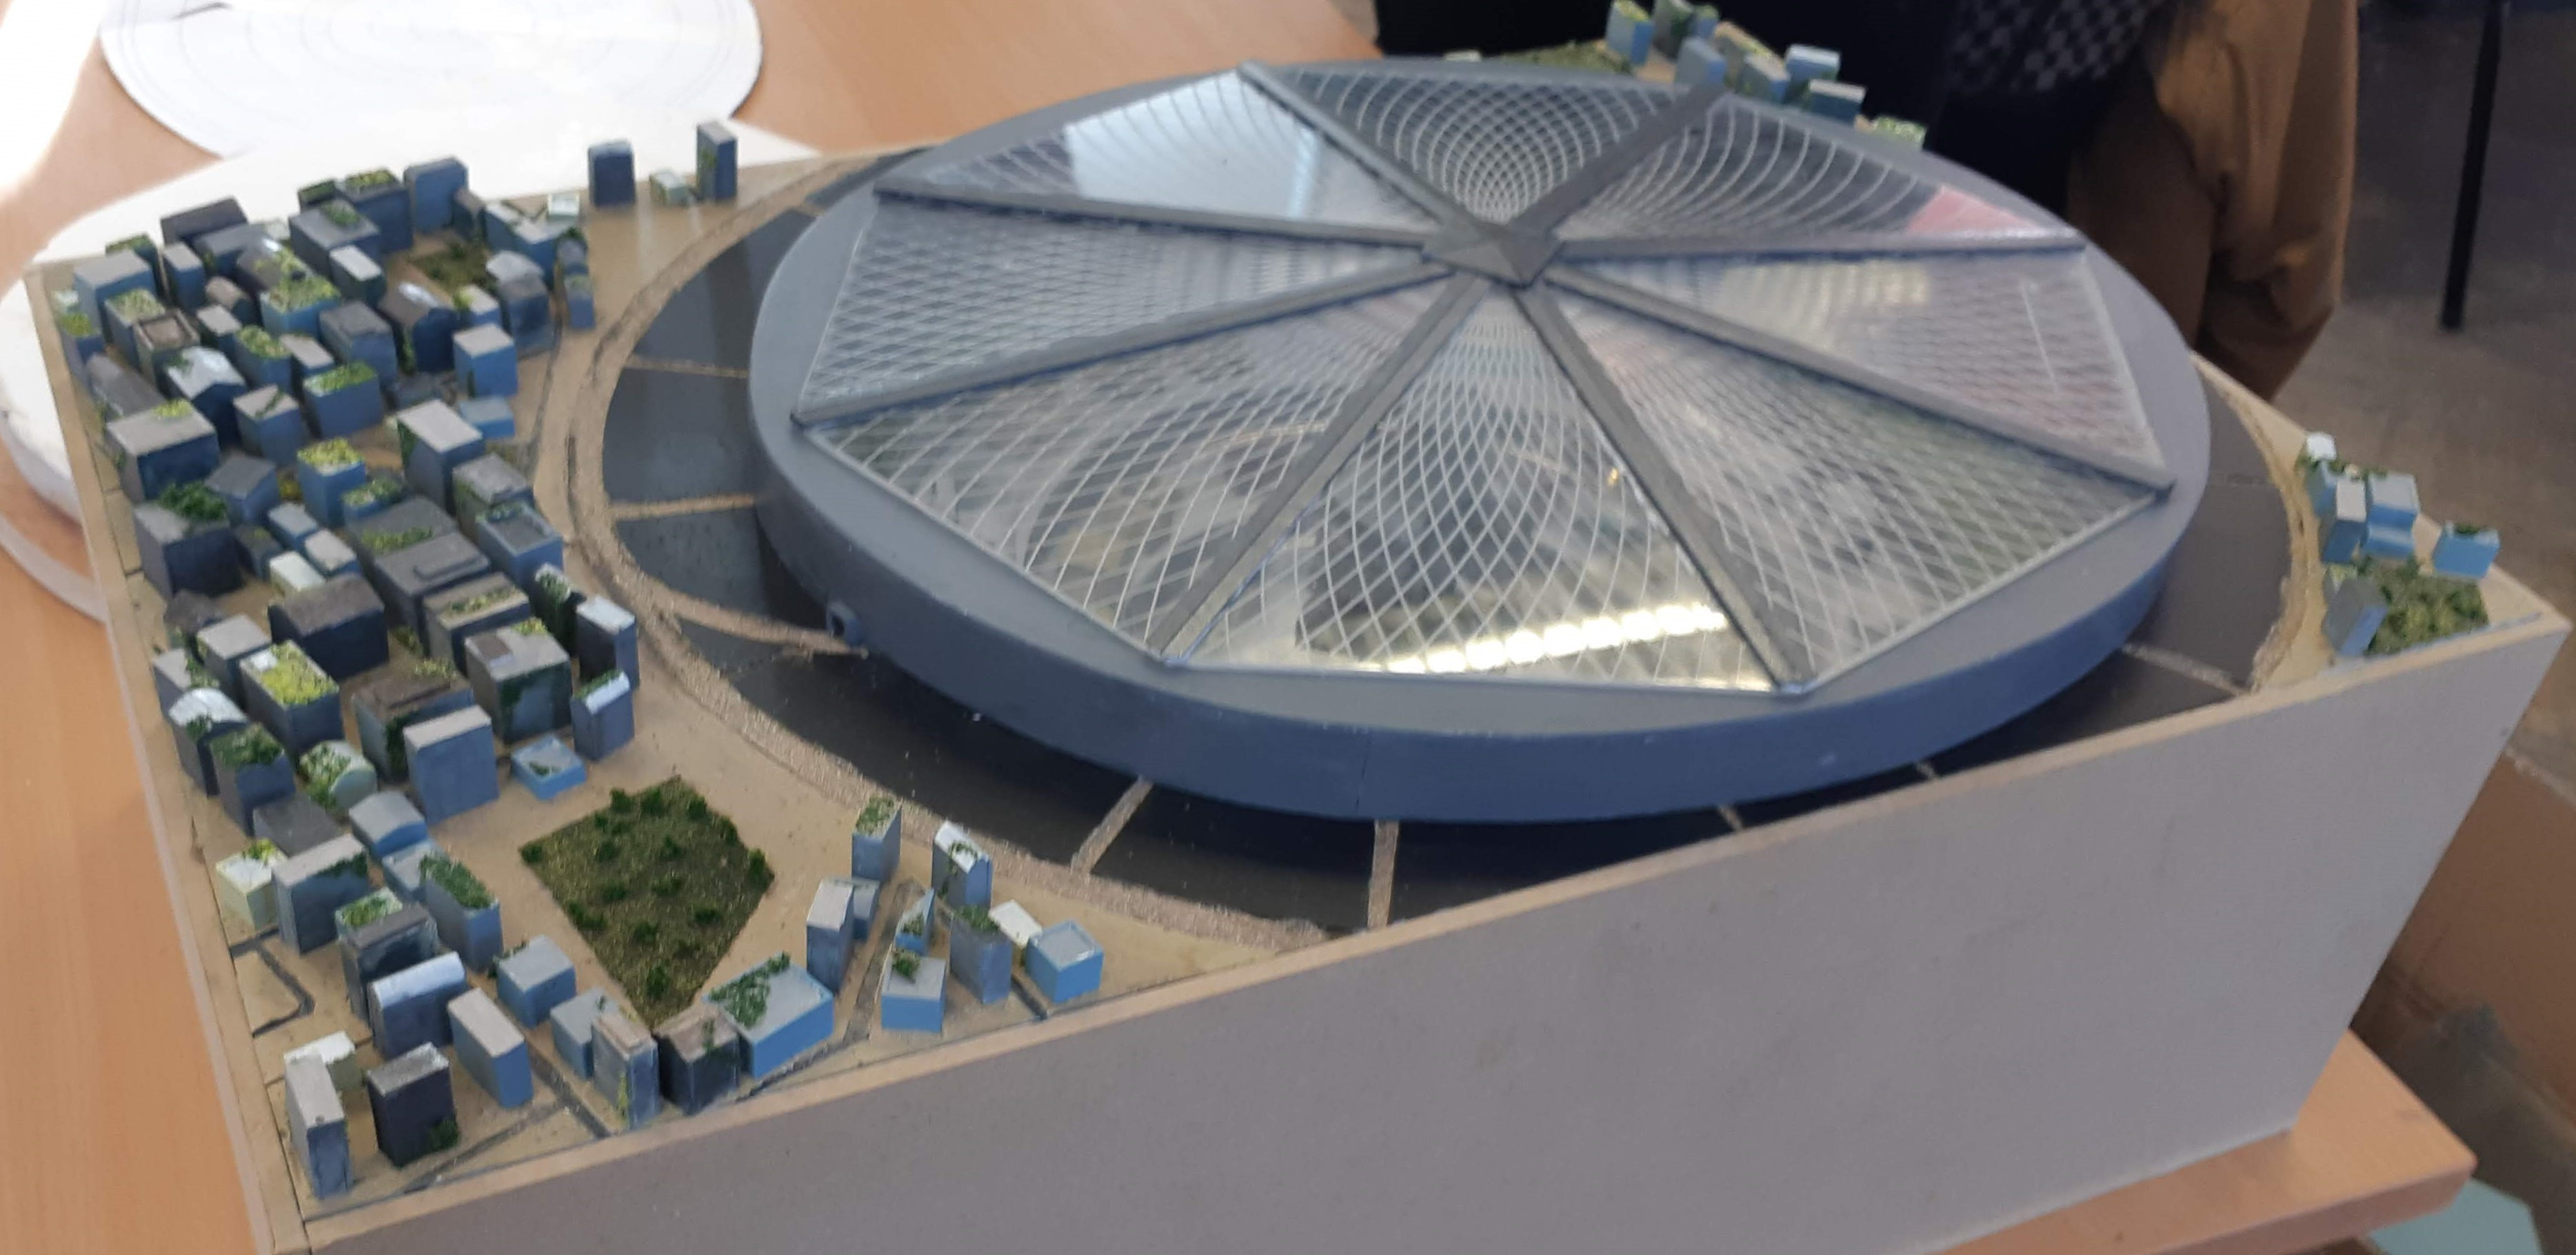 Full model of the dome and city